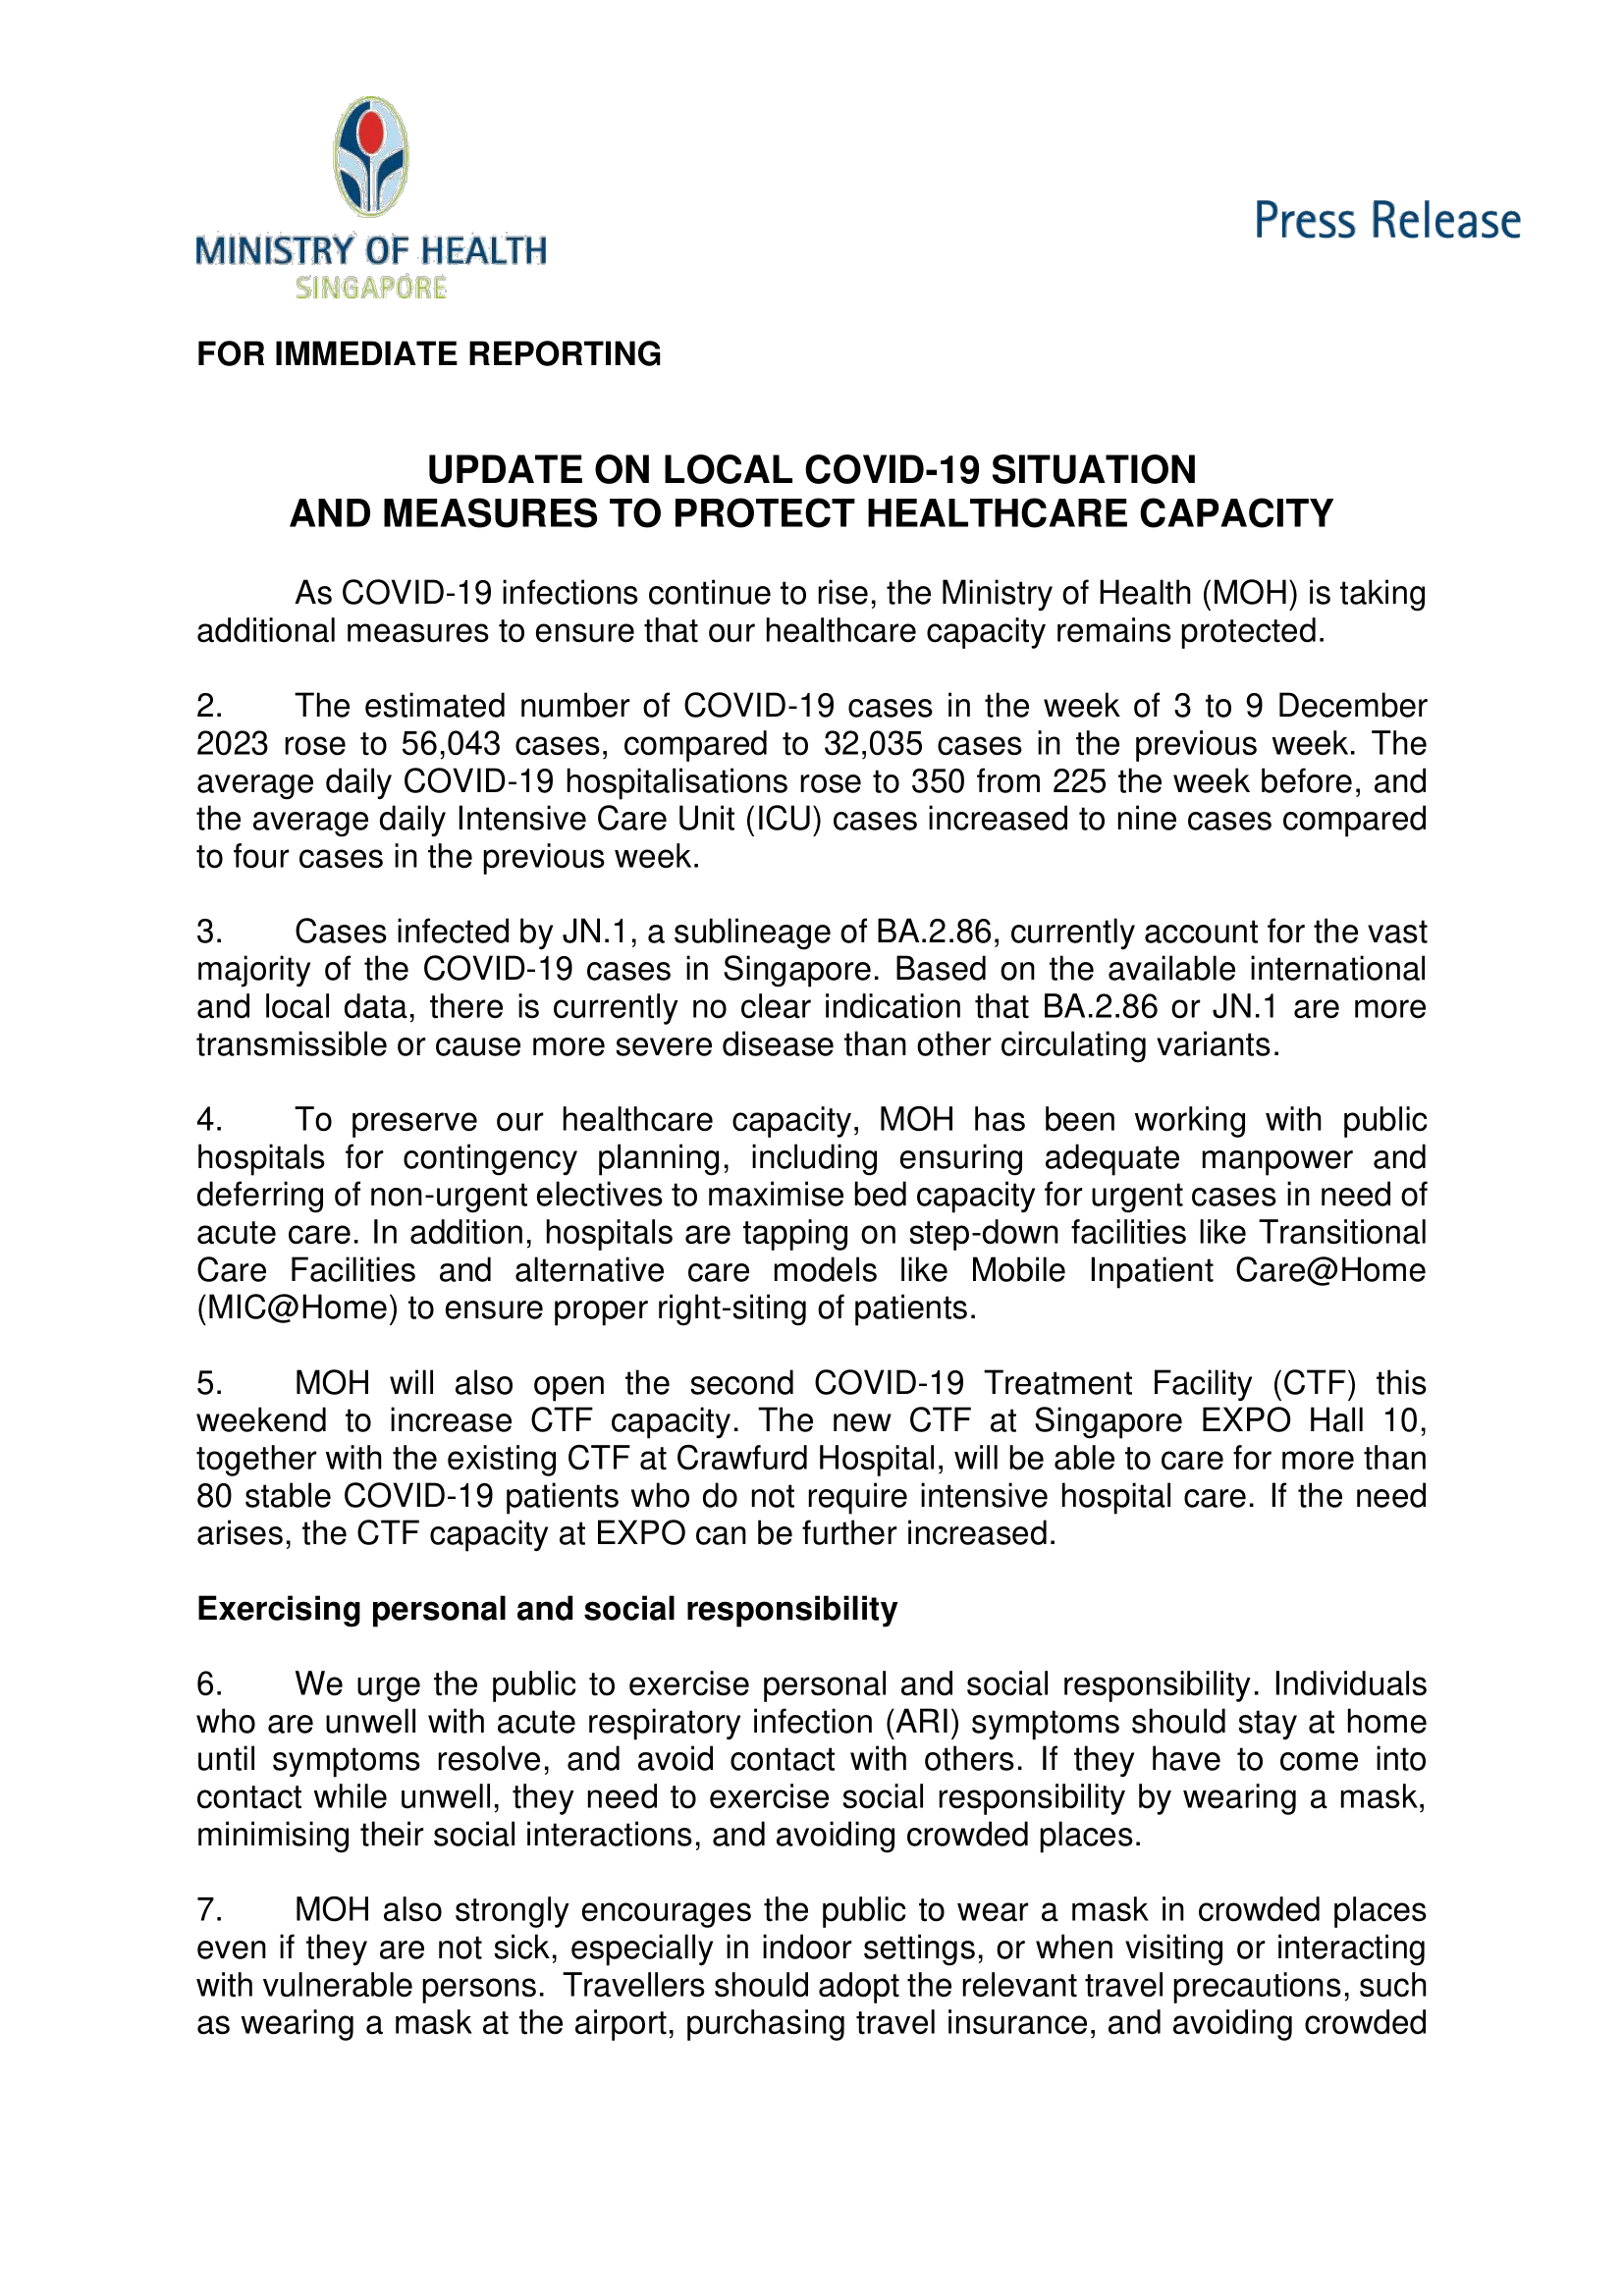 [MOH Connected] Press Release - Update on Local COVID-19 Situation and Measures to Protect Healthcare Capacity-1.png